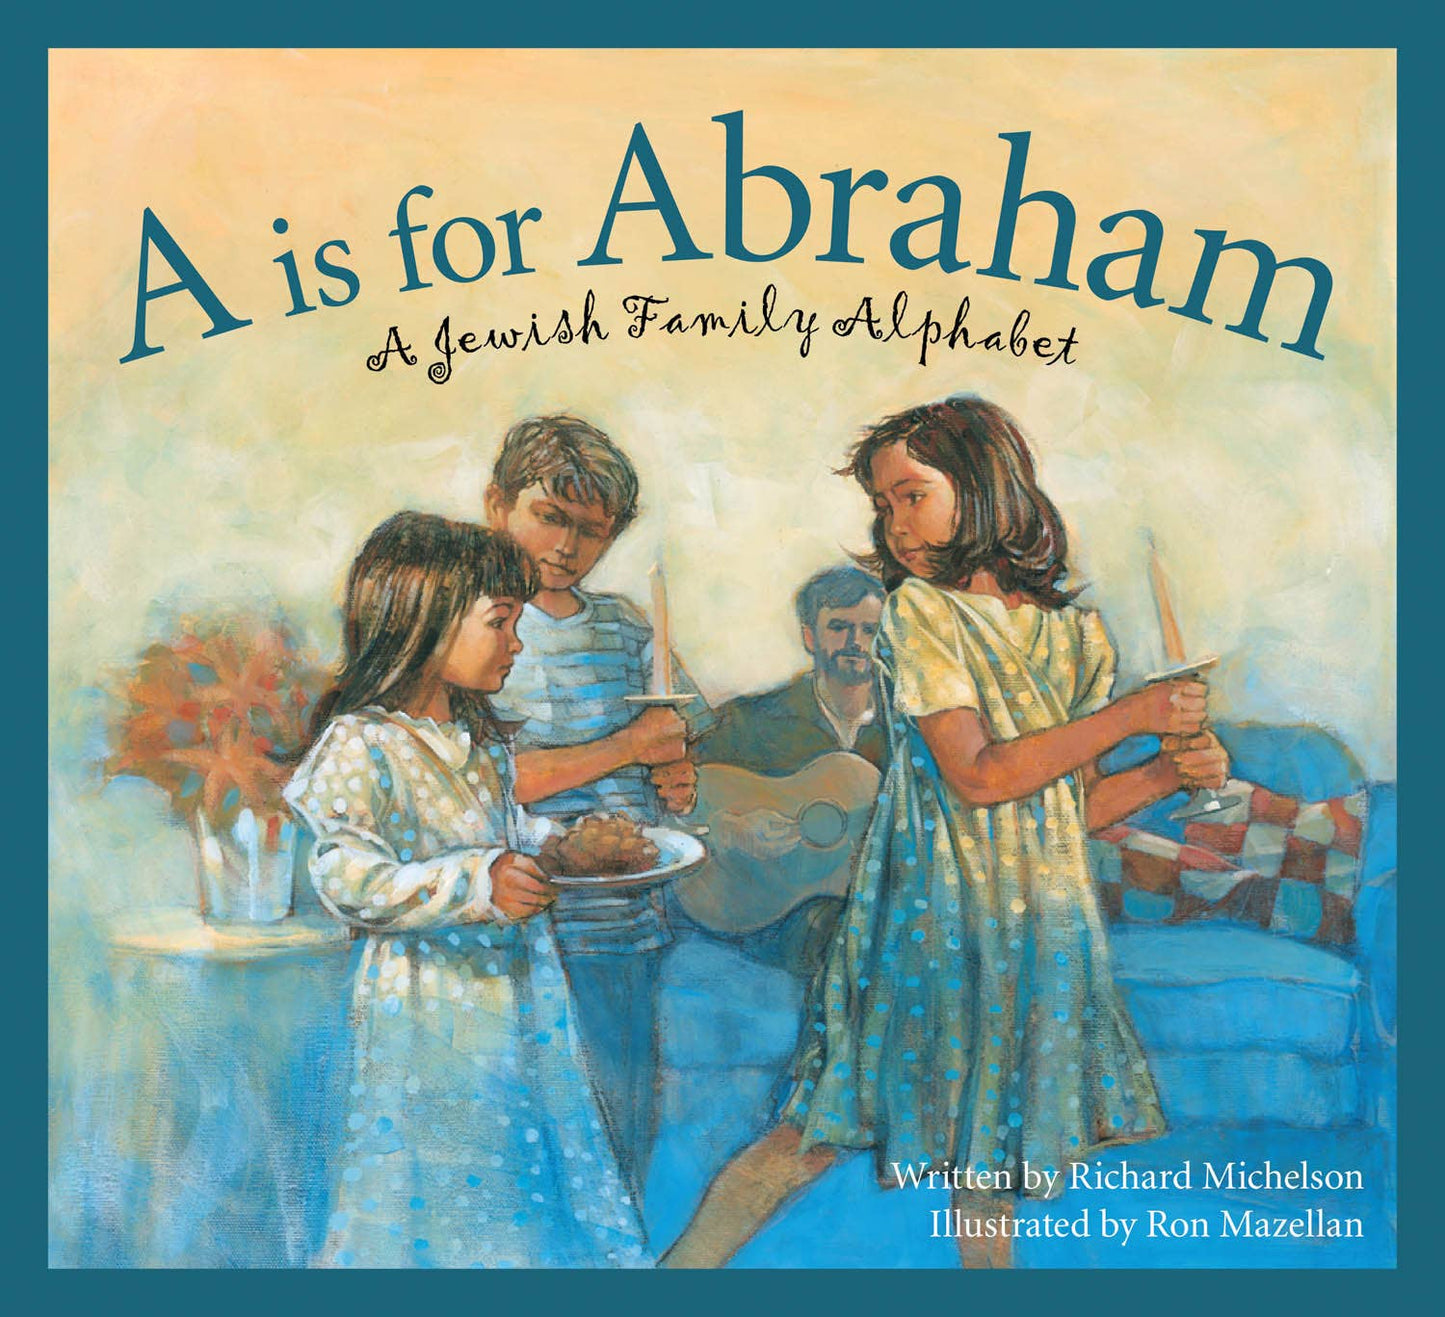 A JEWISH FAMILY Alphabet: A is for Abraham